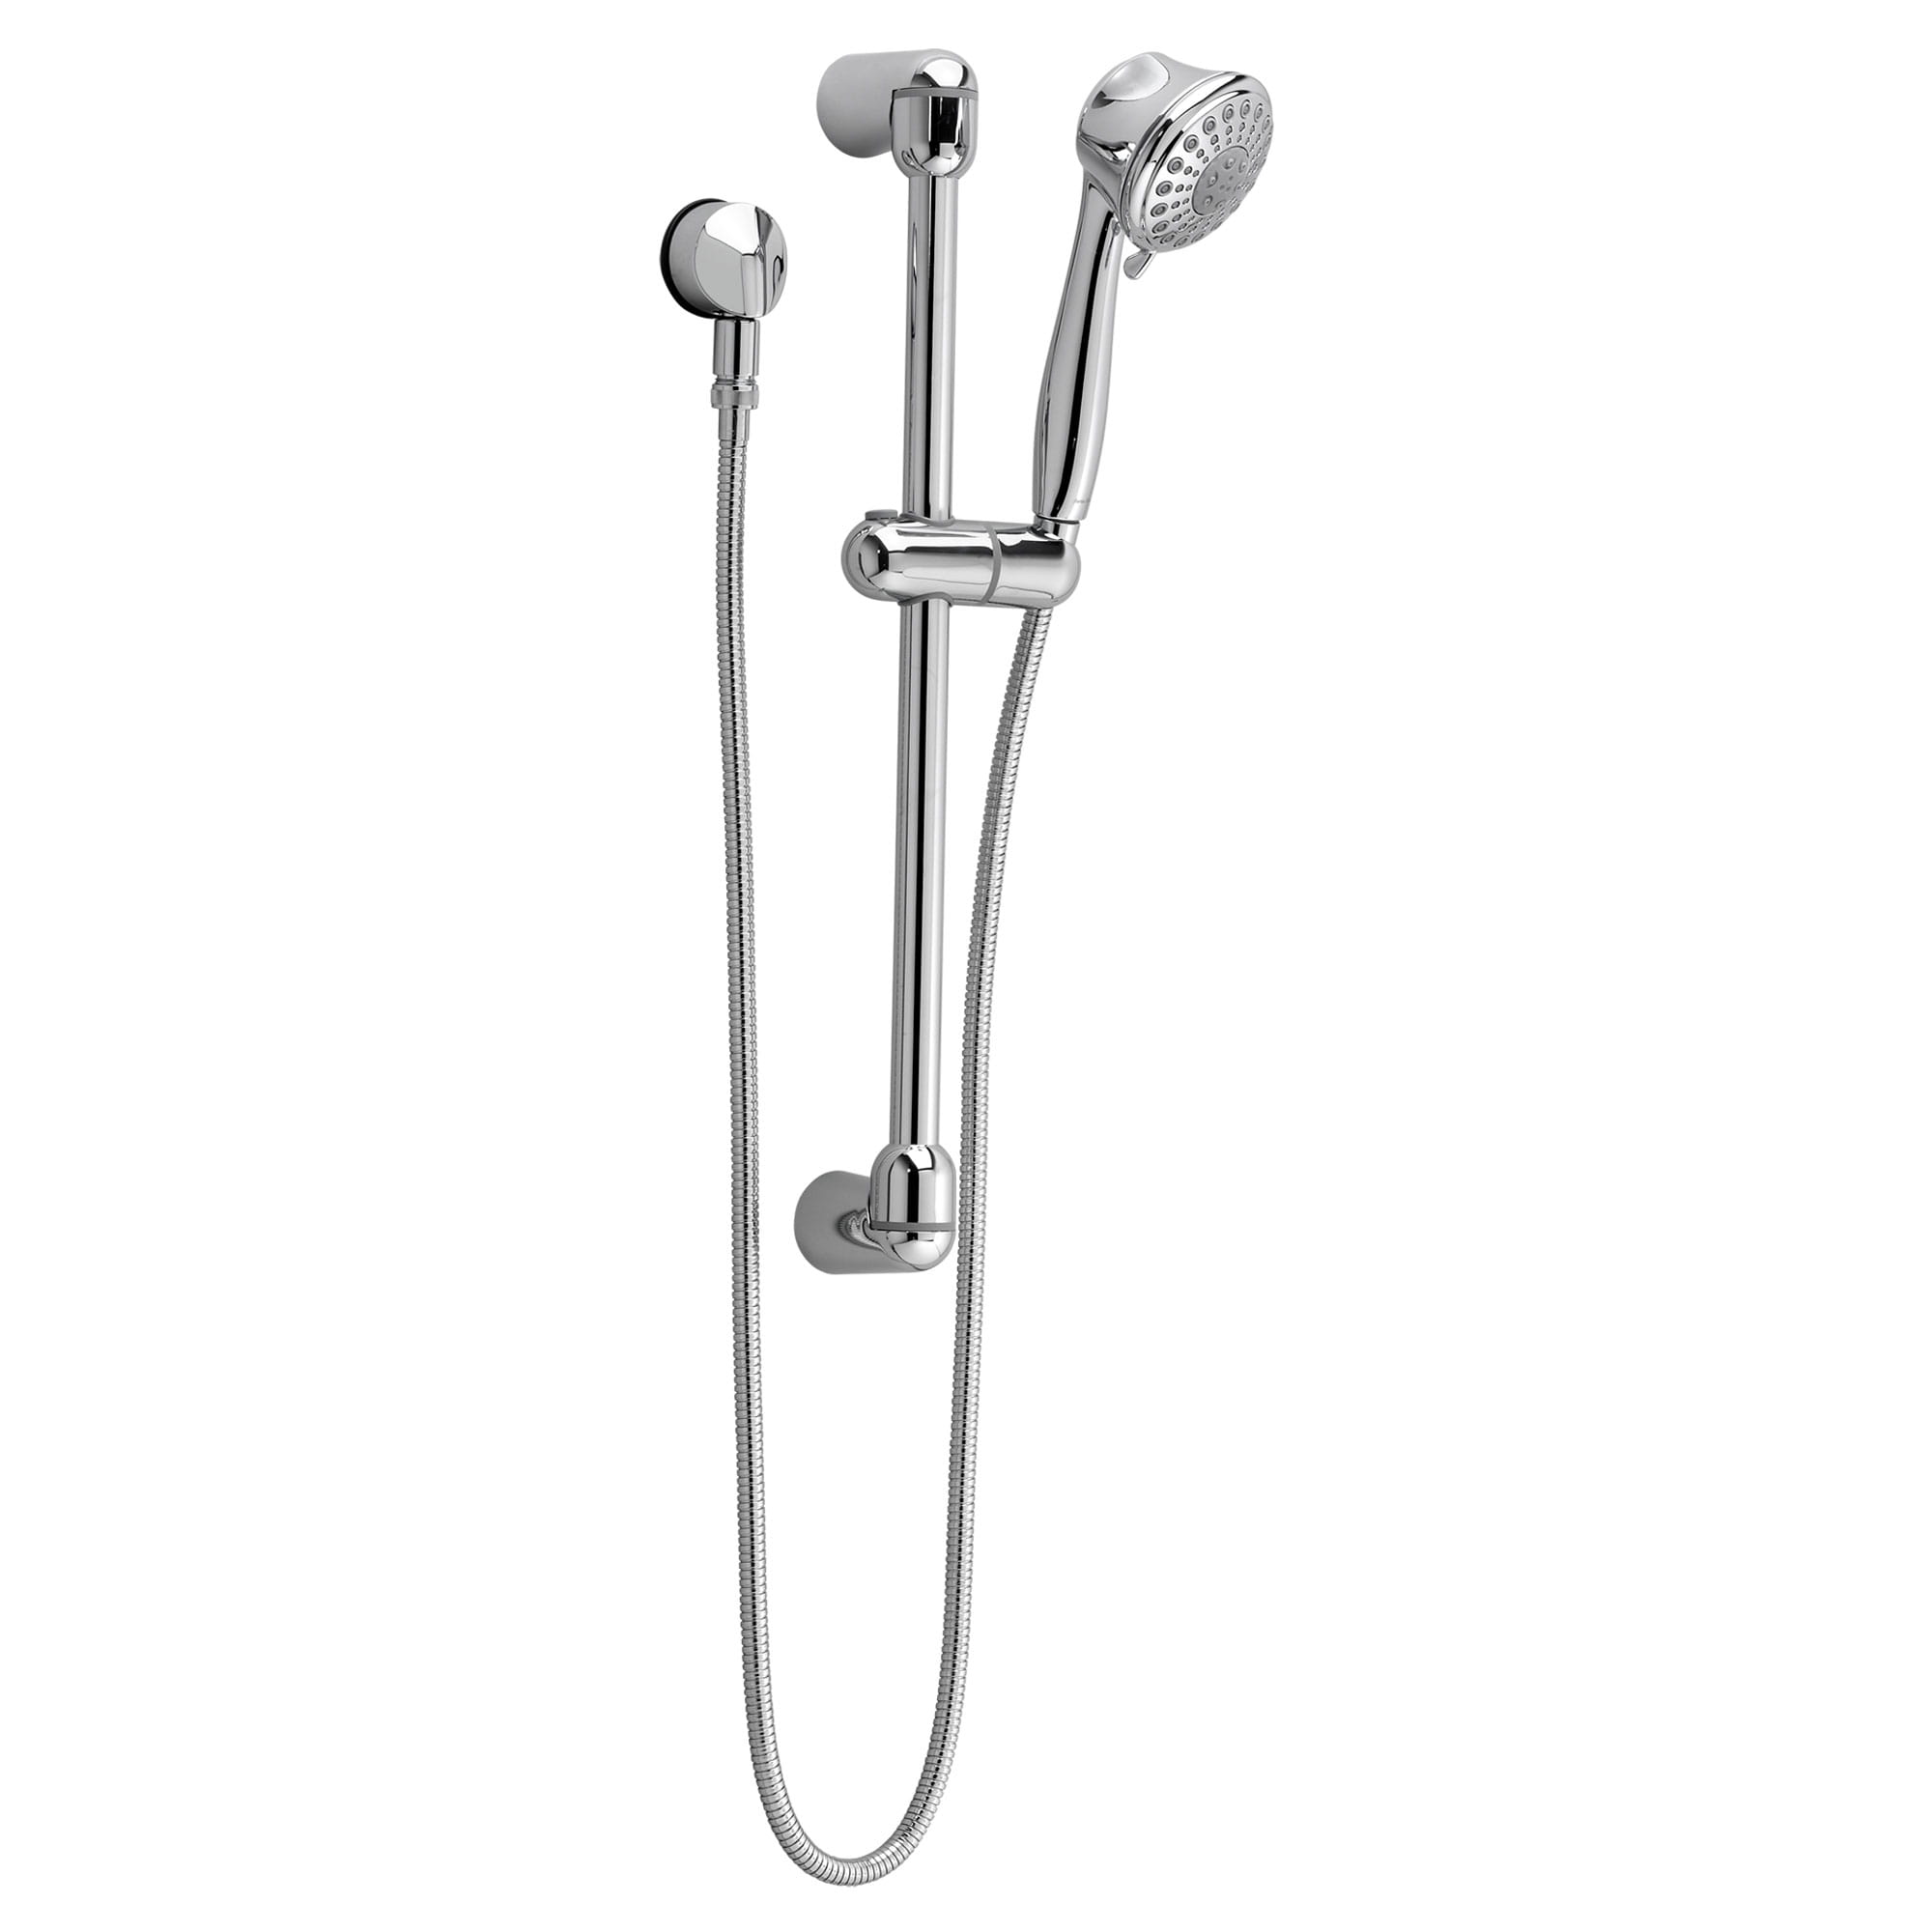 Traditional 5-Function Hand Shower System Kit